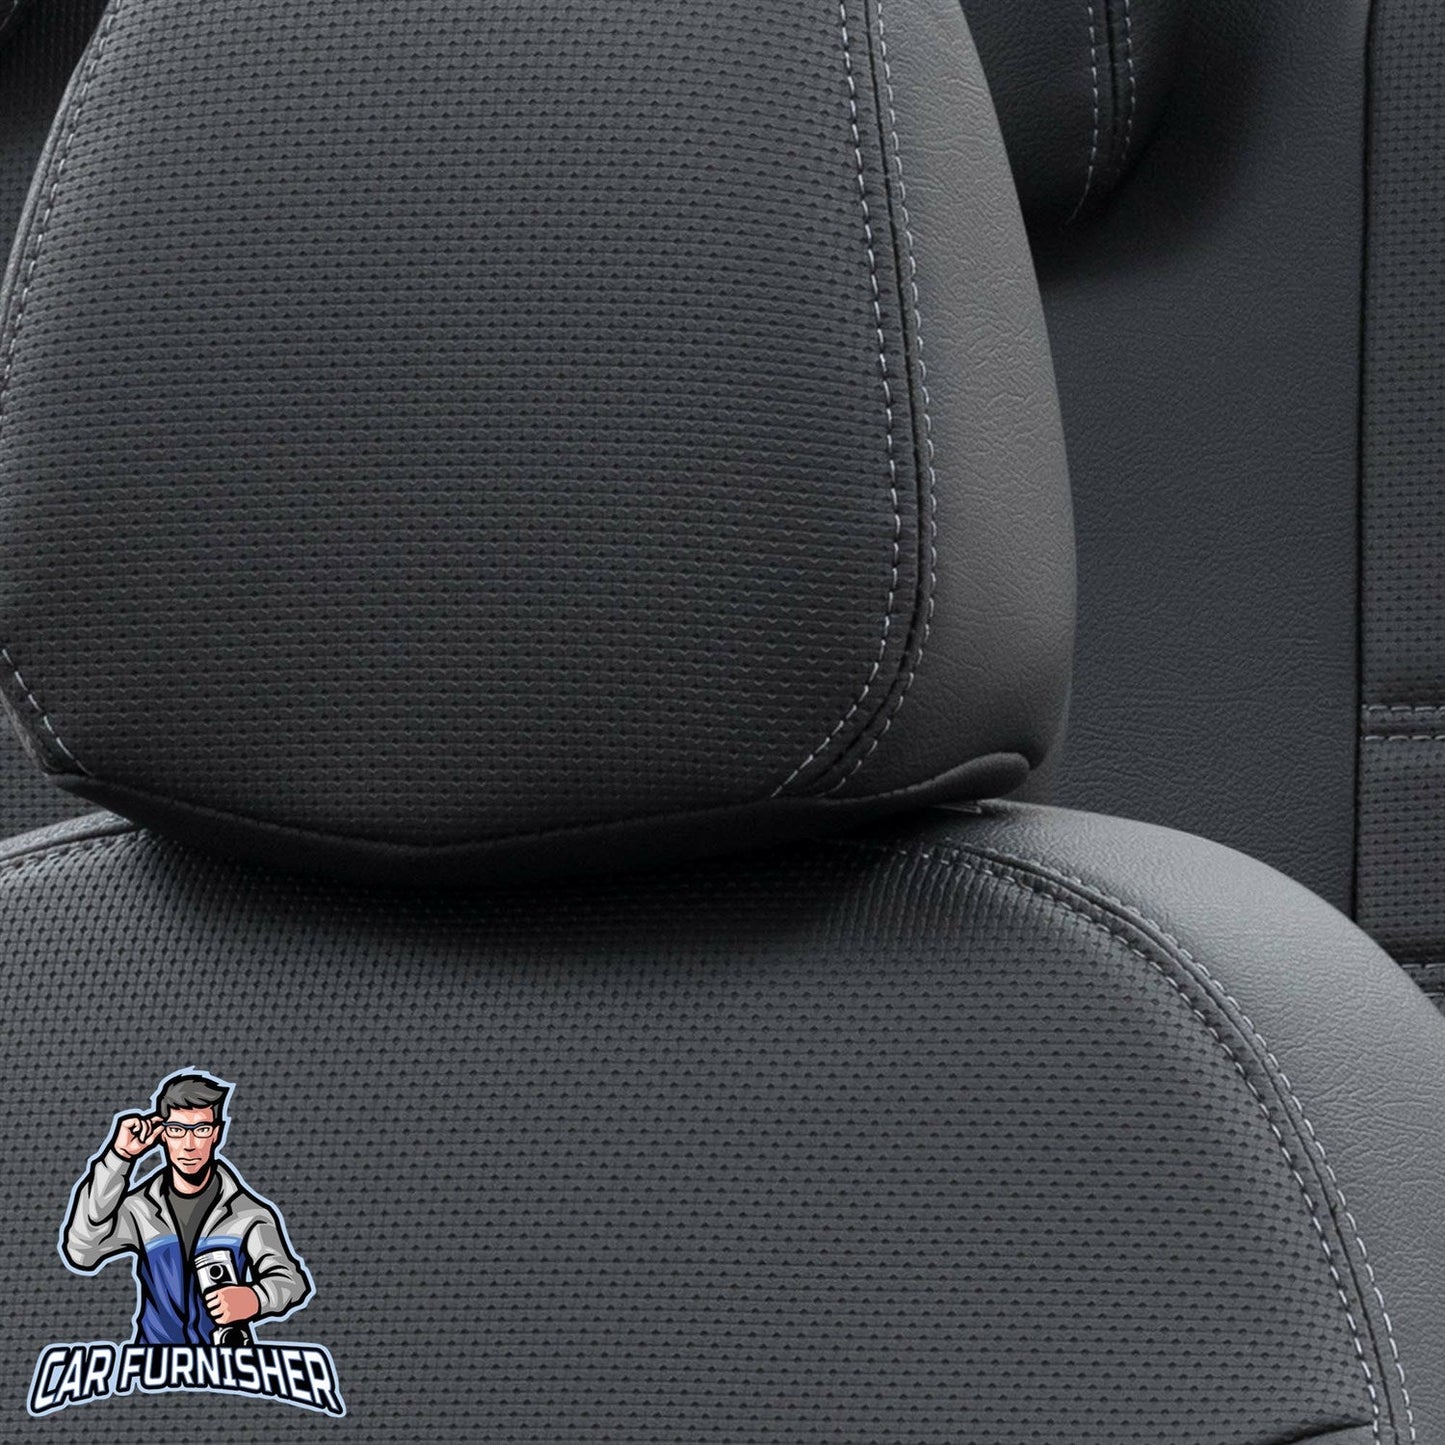 Volvo XC40 Seat Cover New York Leather Design Black Leather